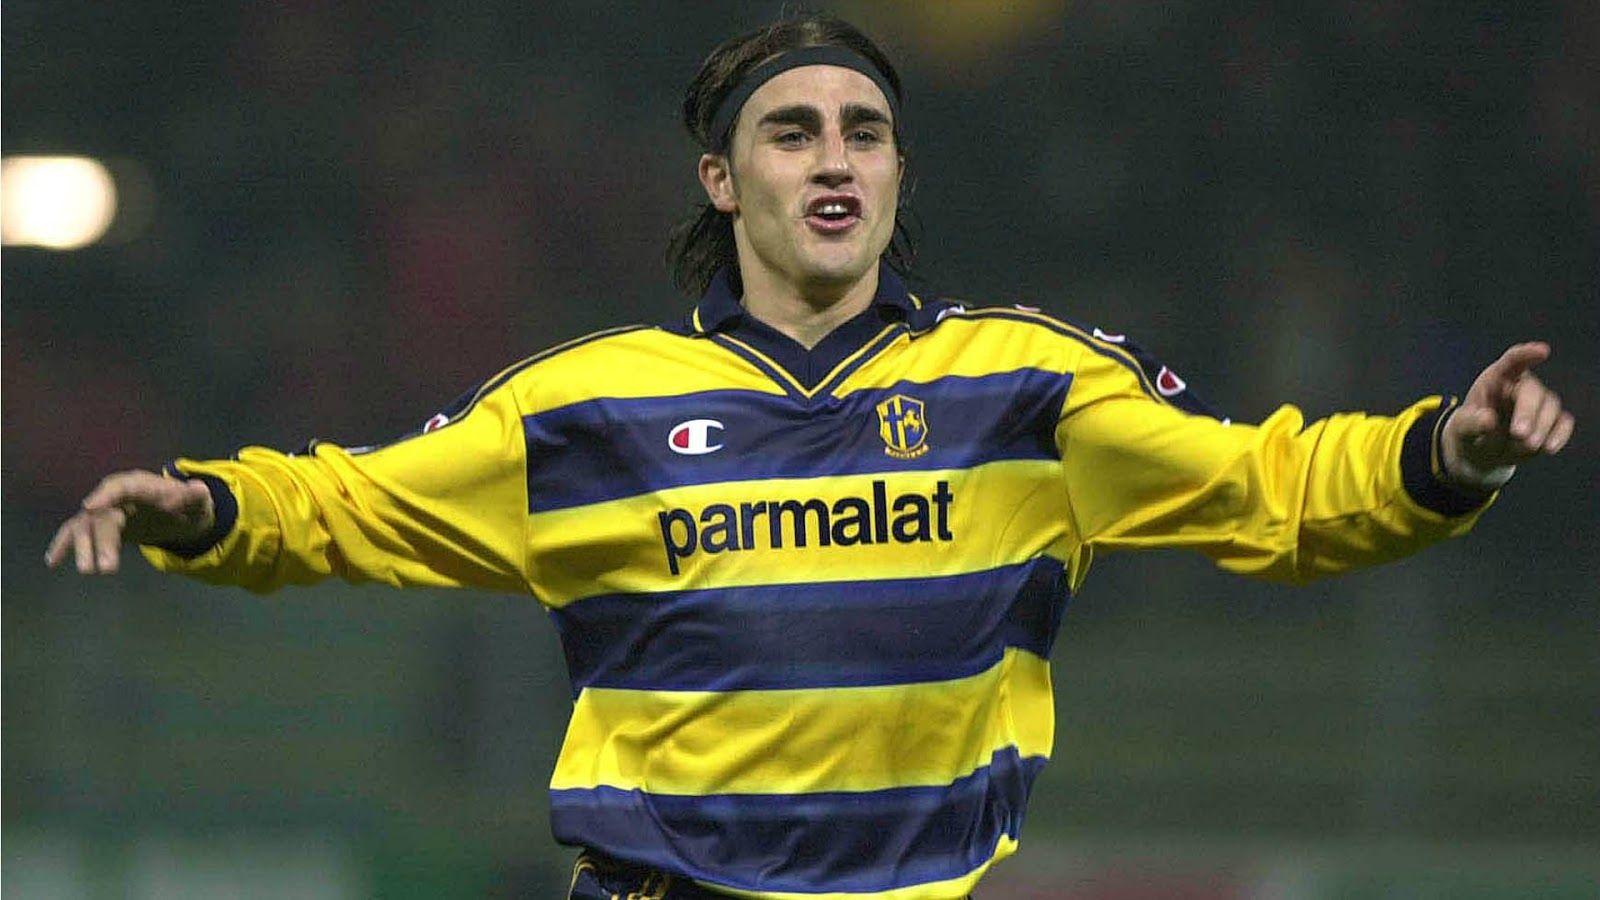 Great Football Stars That Played for Parma